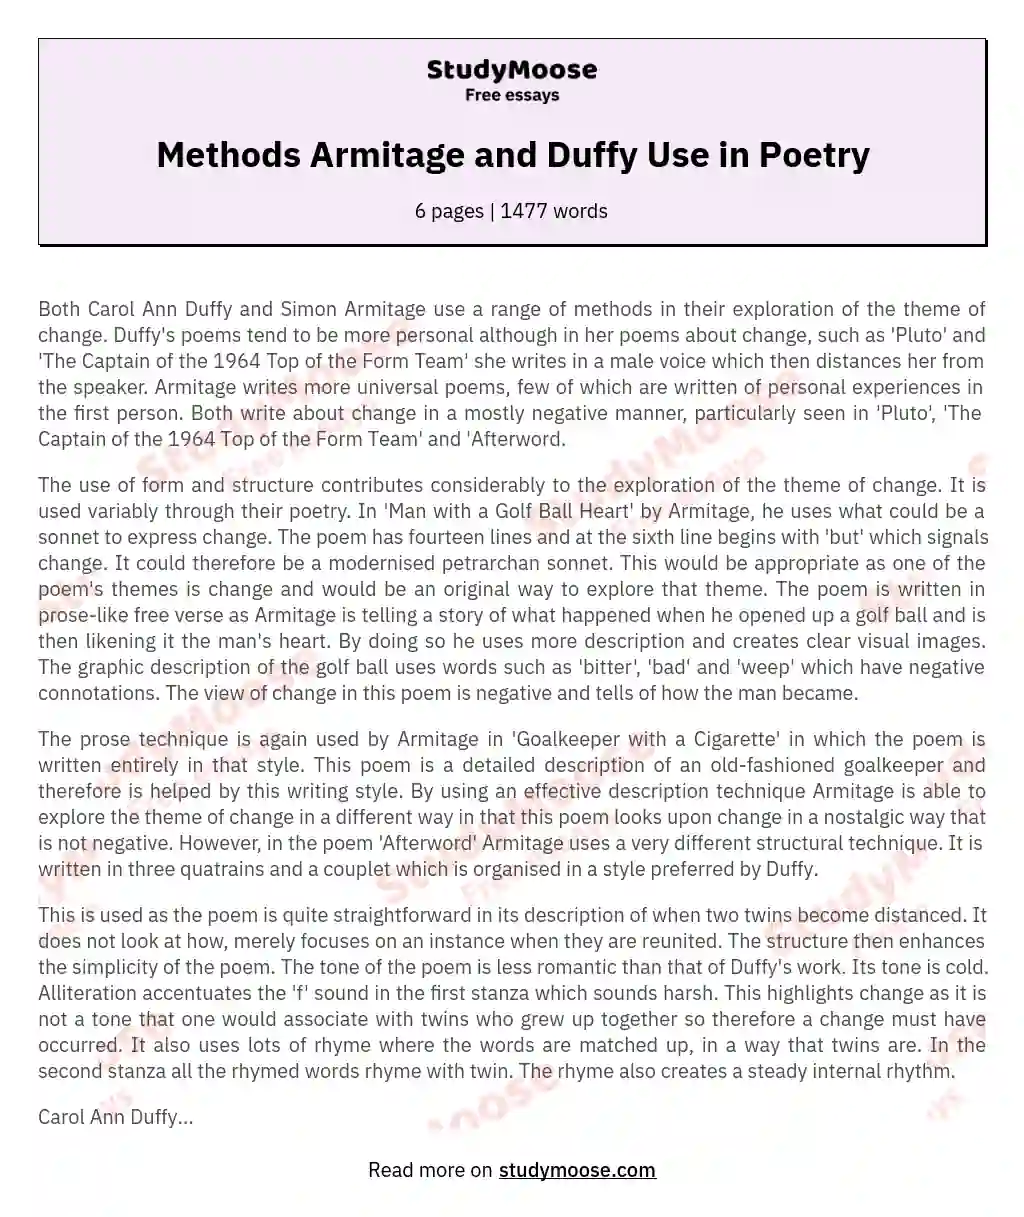 Methods Armitage and Duffy Use in Poetry essay